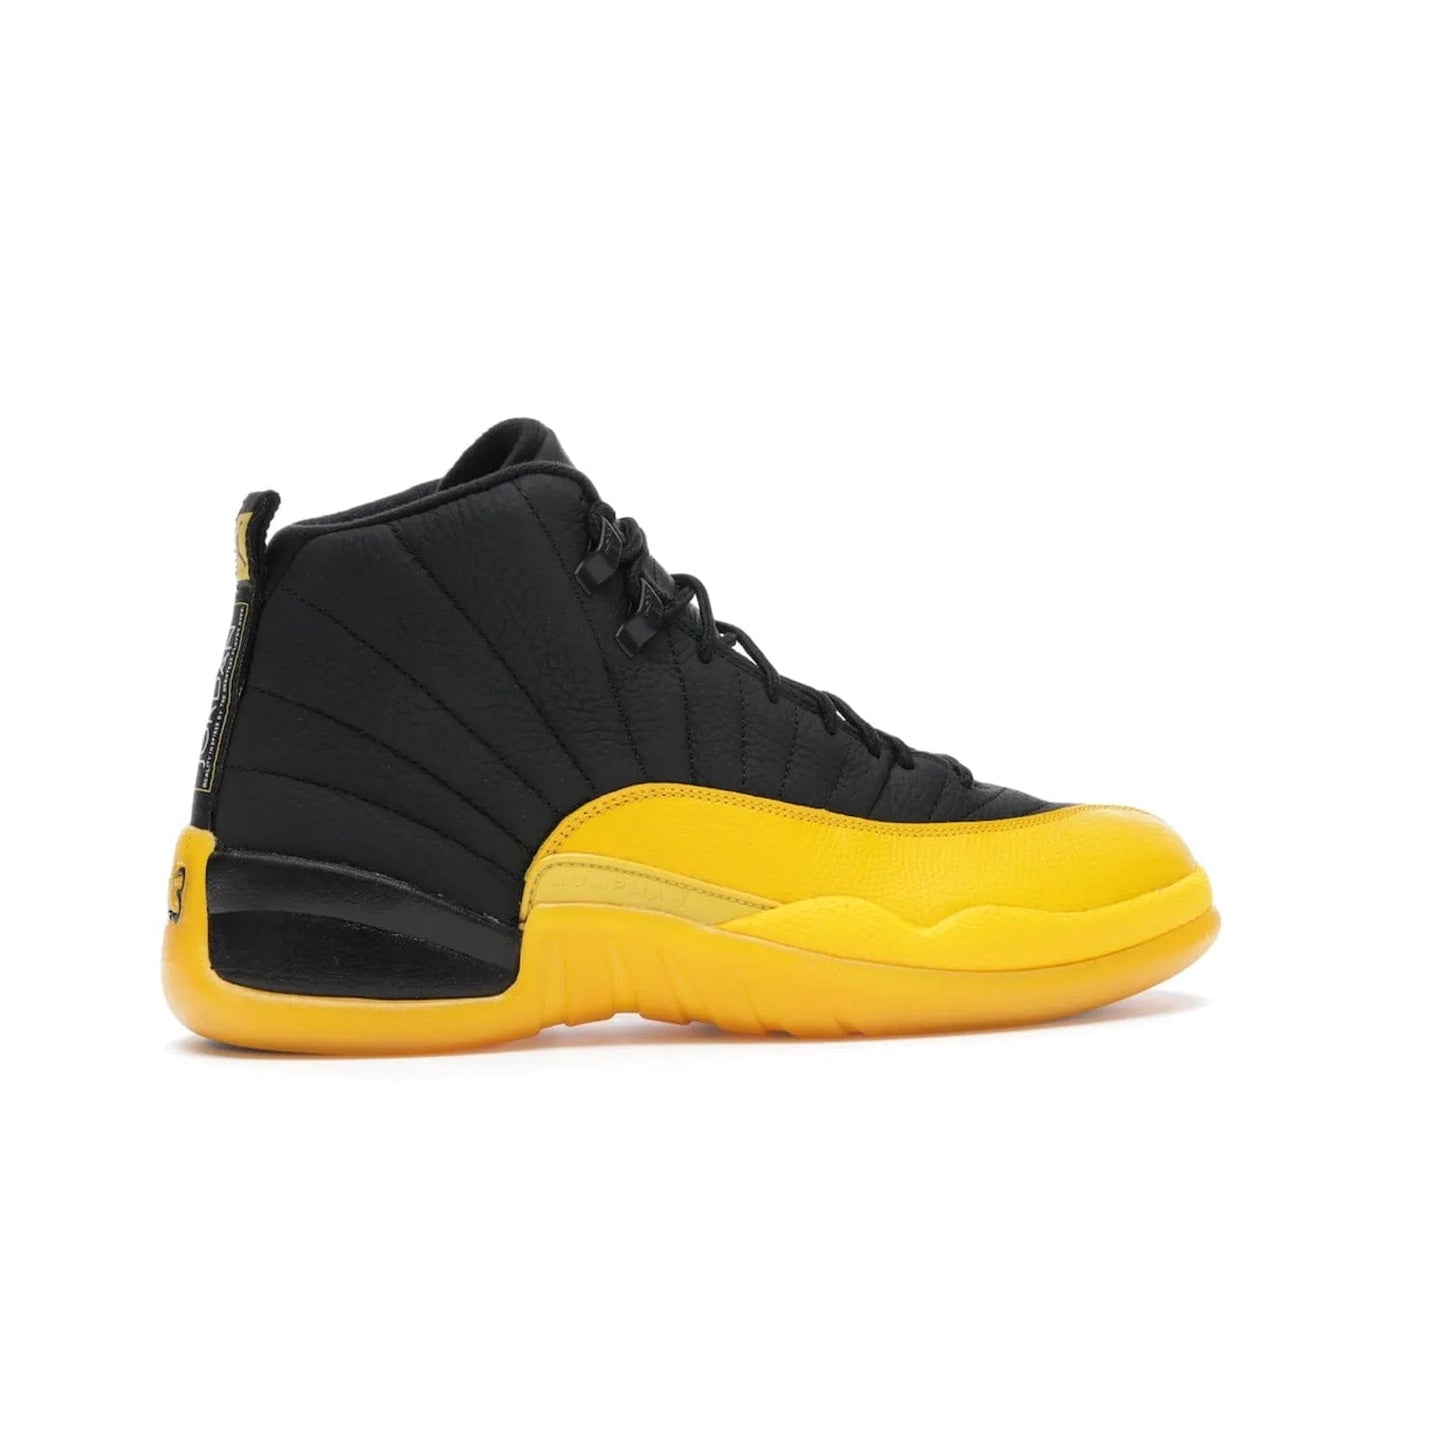 Jordan 12 Retro Black University Gold - Image 35 - Only at www.BallersClubKickz.com - This Jordan 12 Retro features a black tumbled leather upper and University Gold accents for a modern twist. Boasting Jordan "Two Three" branding and a yellow sole, these shoes will elevate your wardrobe. Fresh, sleek, and one of a kind - the Jordan 12 University Gold is your summer sneaker.